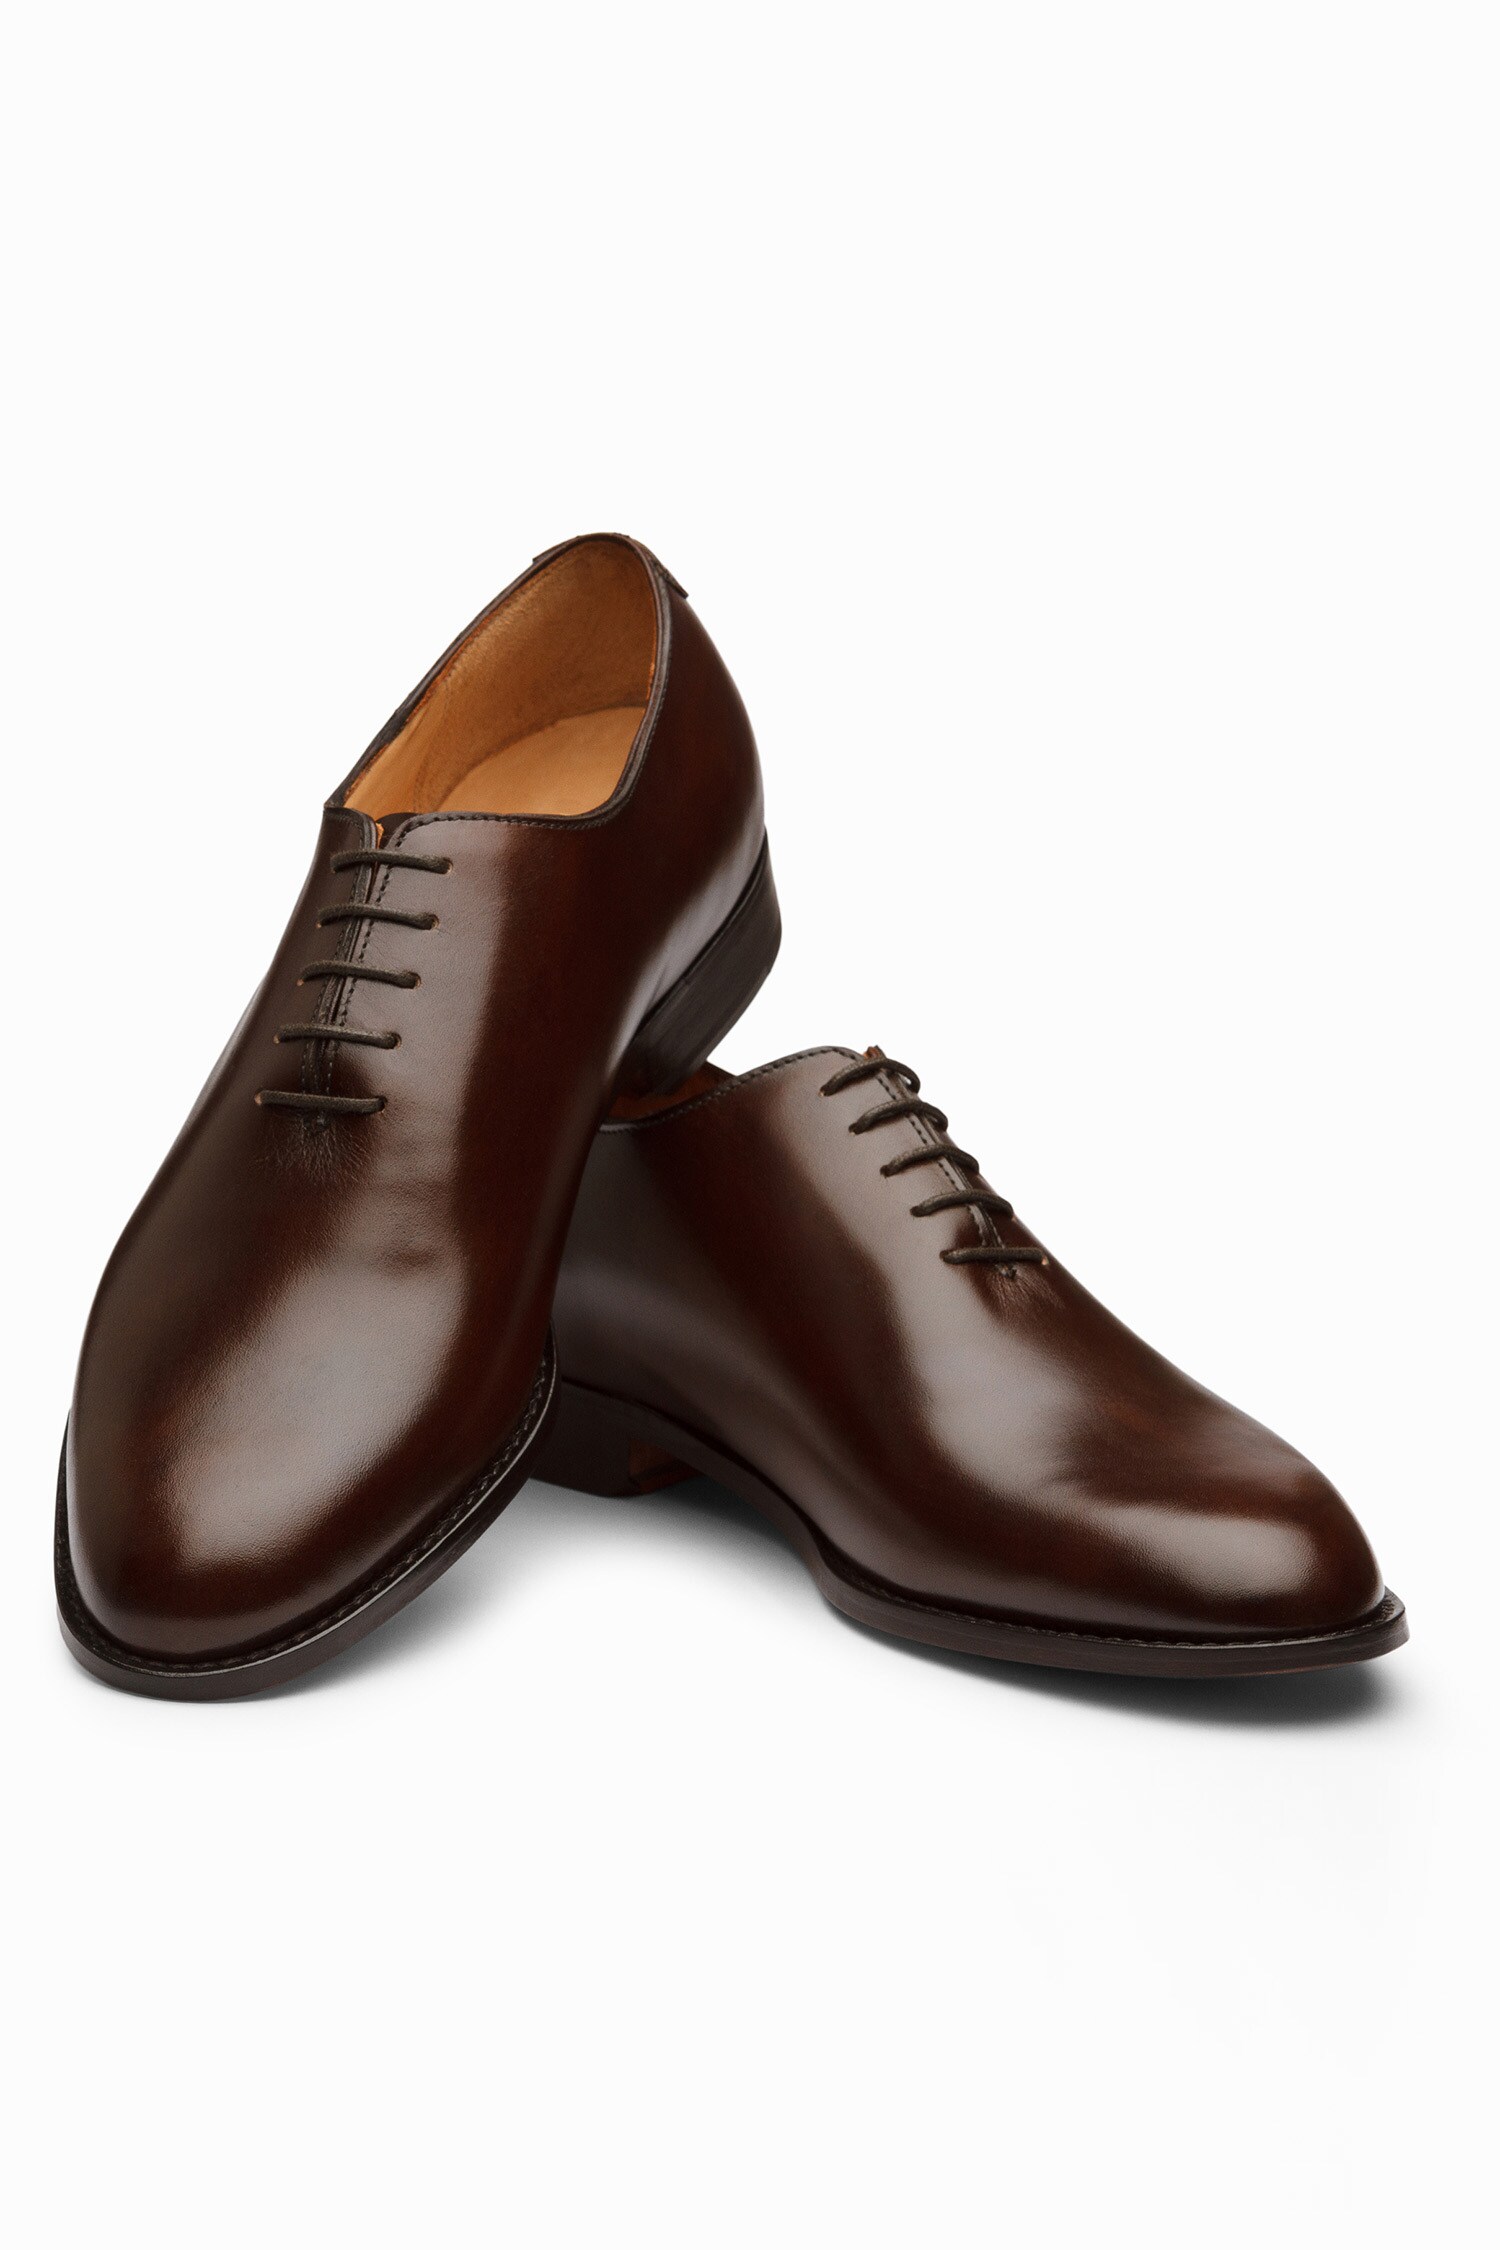 3DM LIFESTYLE Brown Oxford Leather Shoes